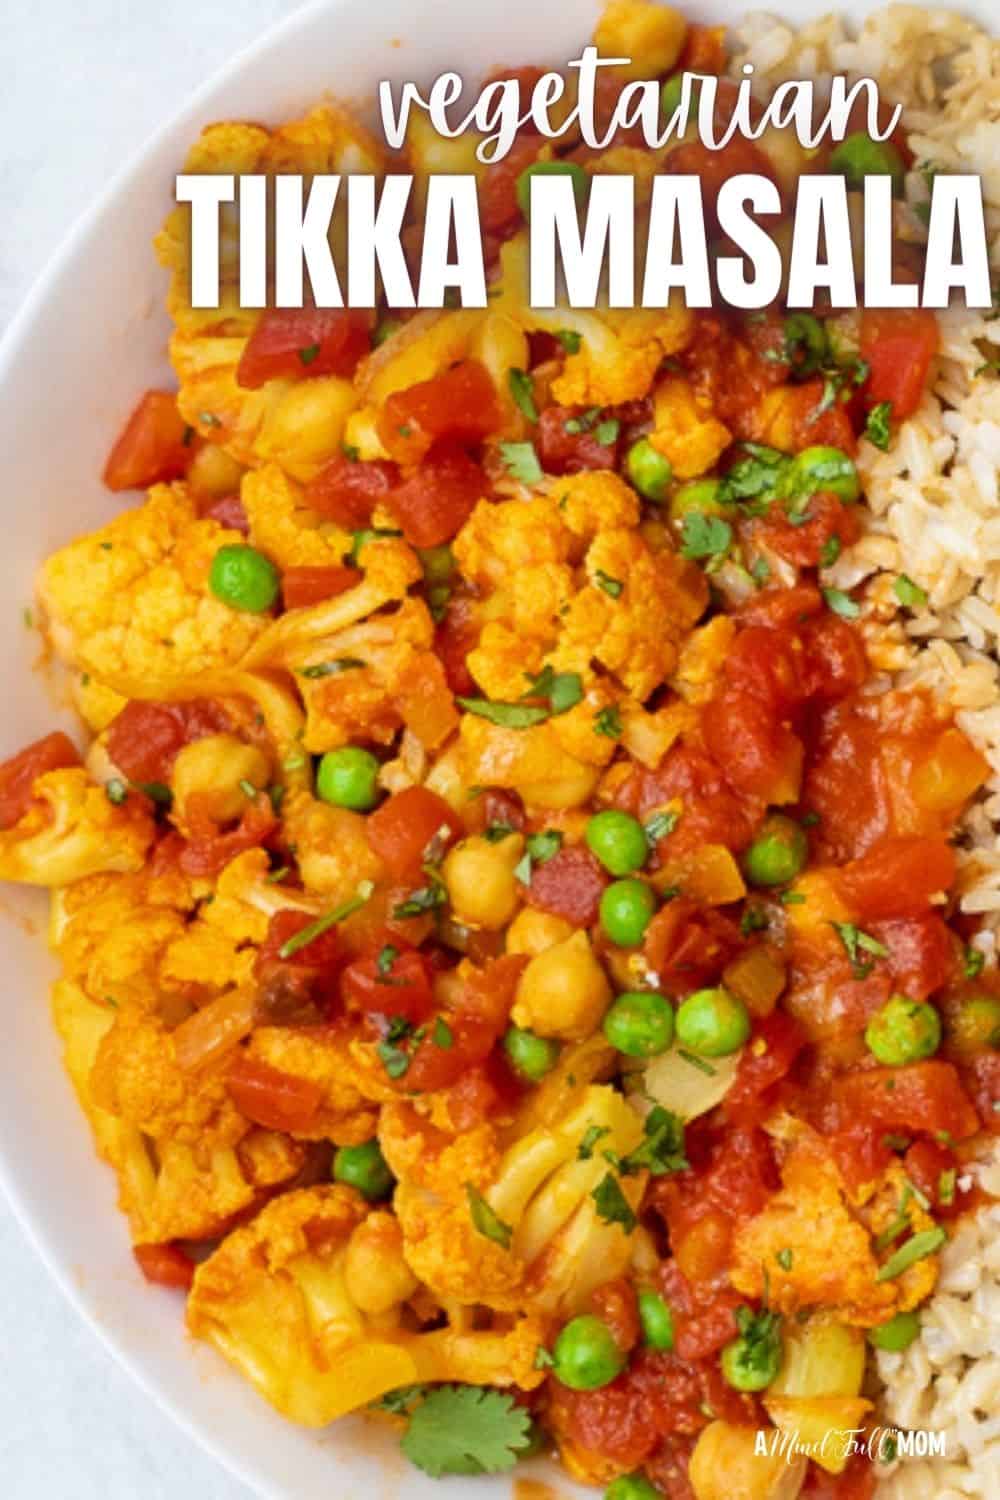 Featuring cauliflower, chickpeas, and a flavorful spiced tomato sauce, this recipe for Vegetarian Tikka Masala is a hearty and flavorful vegan-friendly dinner recipe made with wholesome, easy-to-find ingredients. 